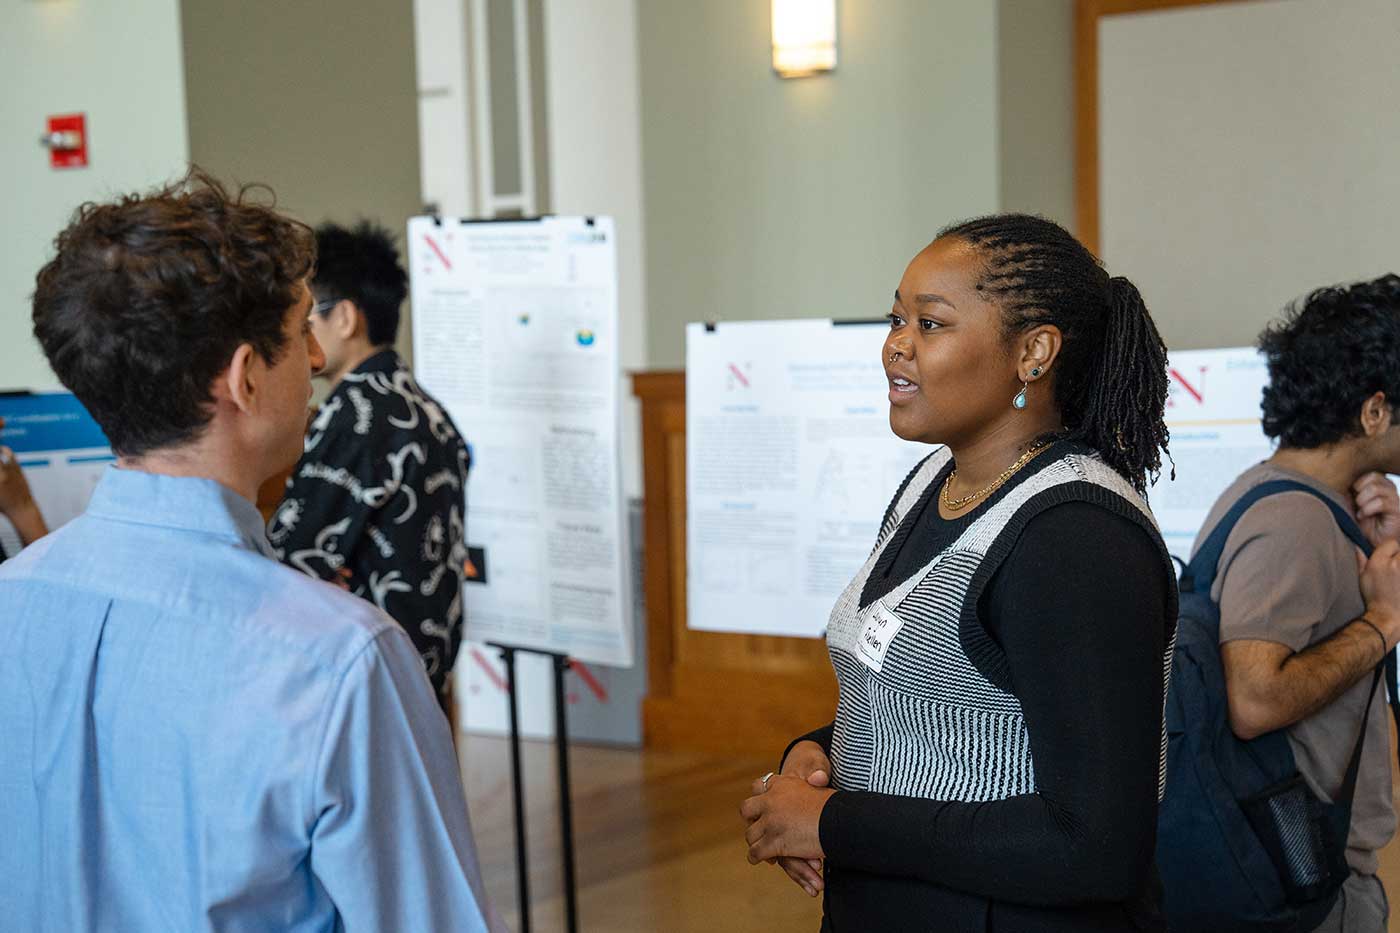 Lauryn Fluellen discusses her research with another student. The two students are standing in a ballroom.